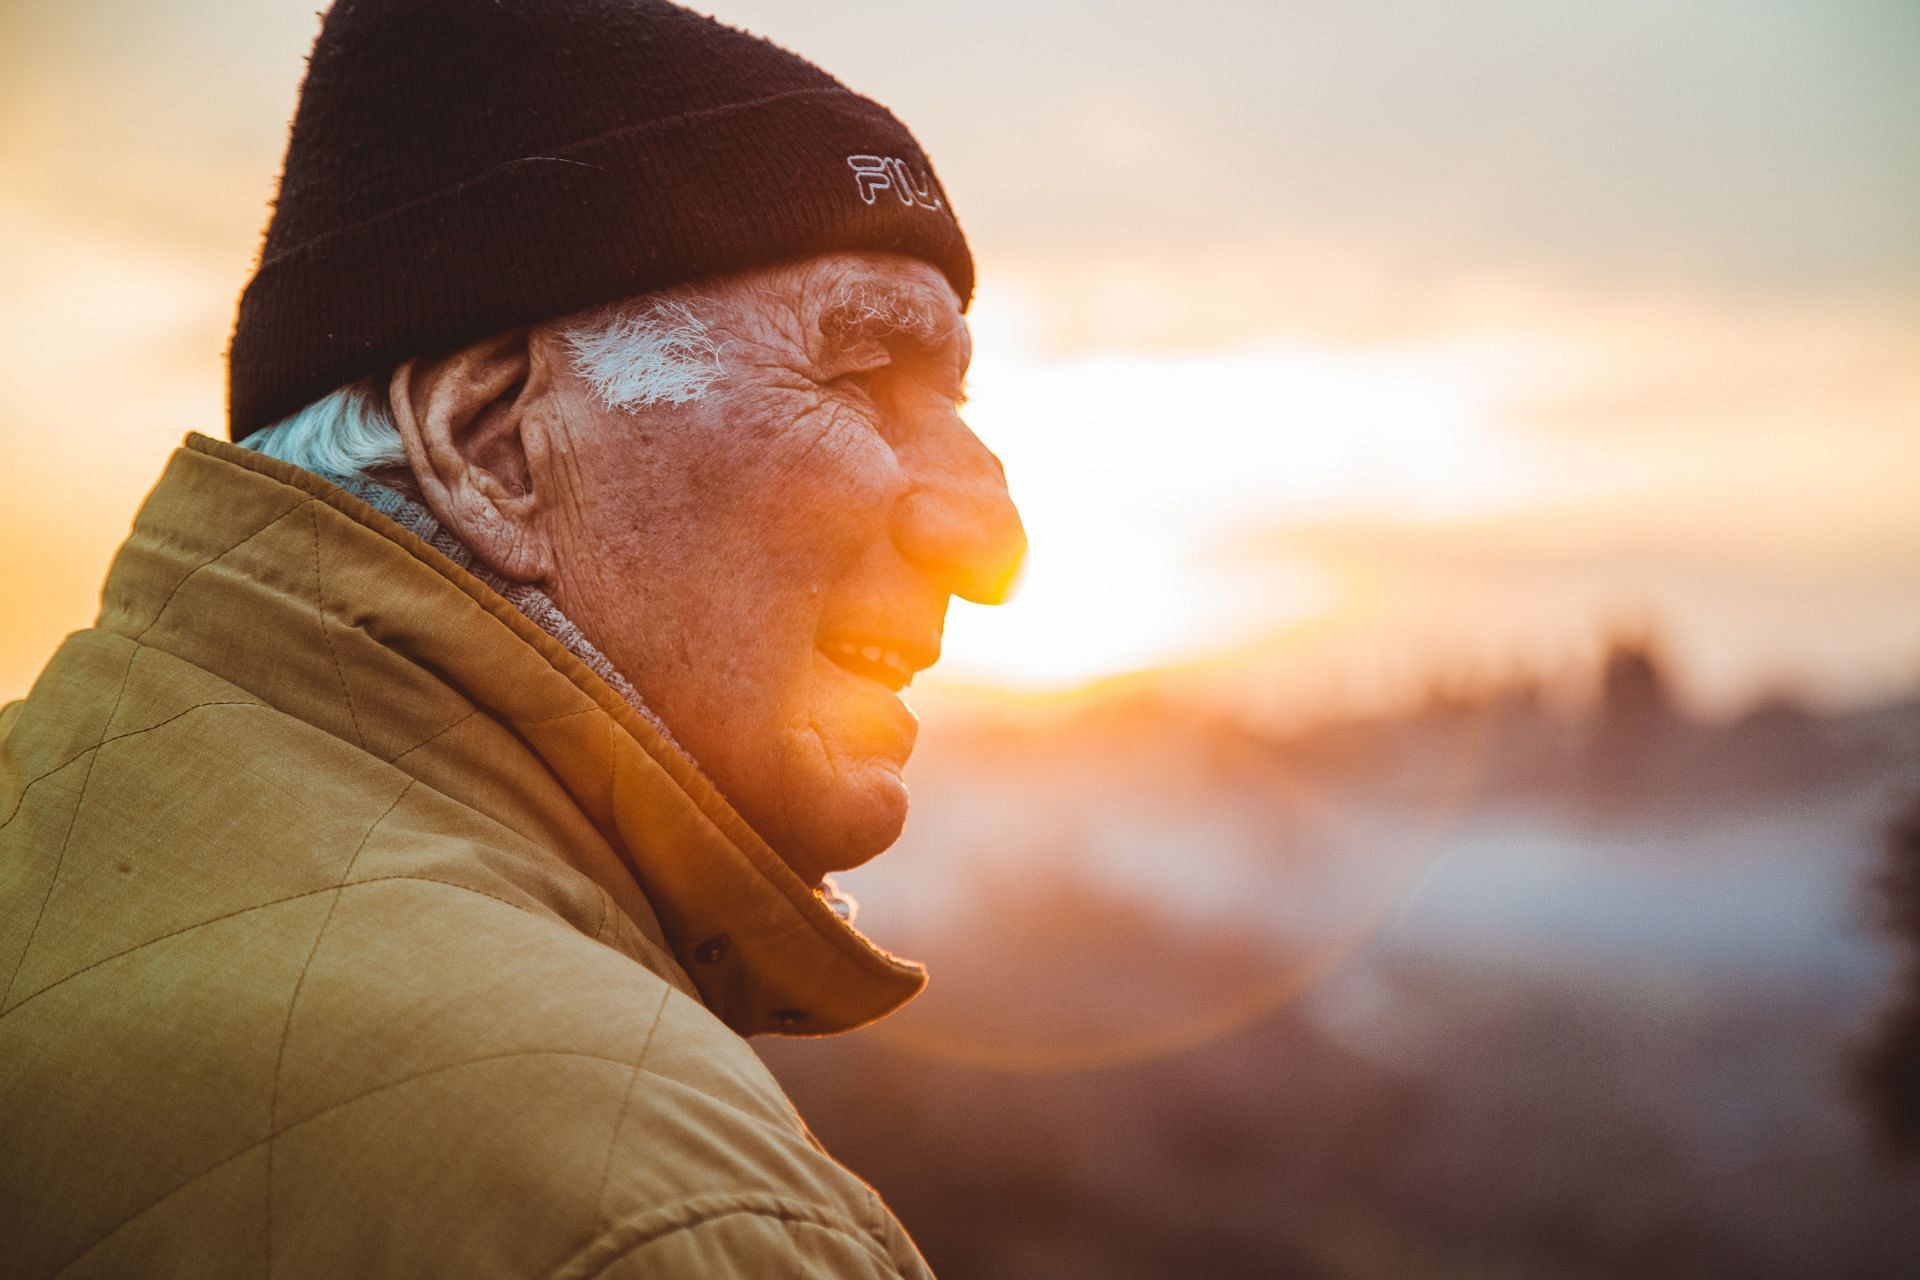 The elderly can improve their hips by exercising. (Image via unsplash/Matteo Vistocco)